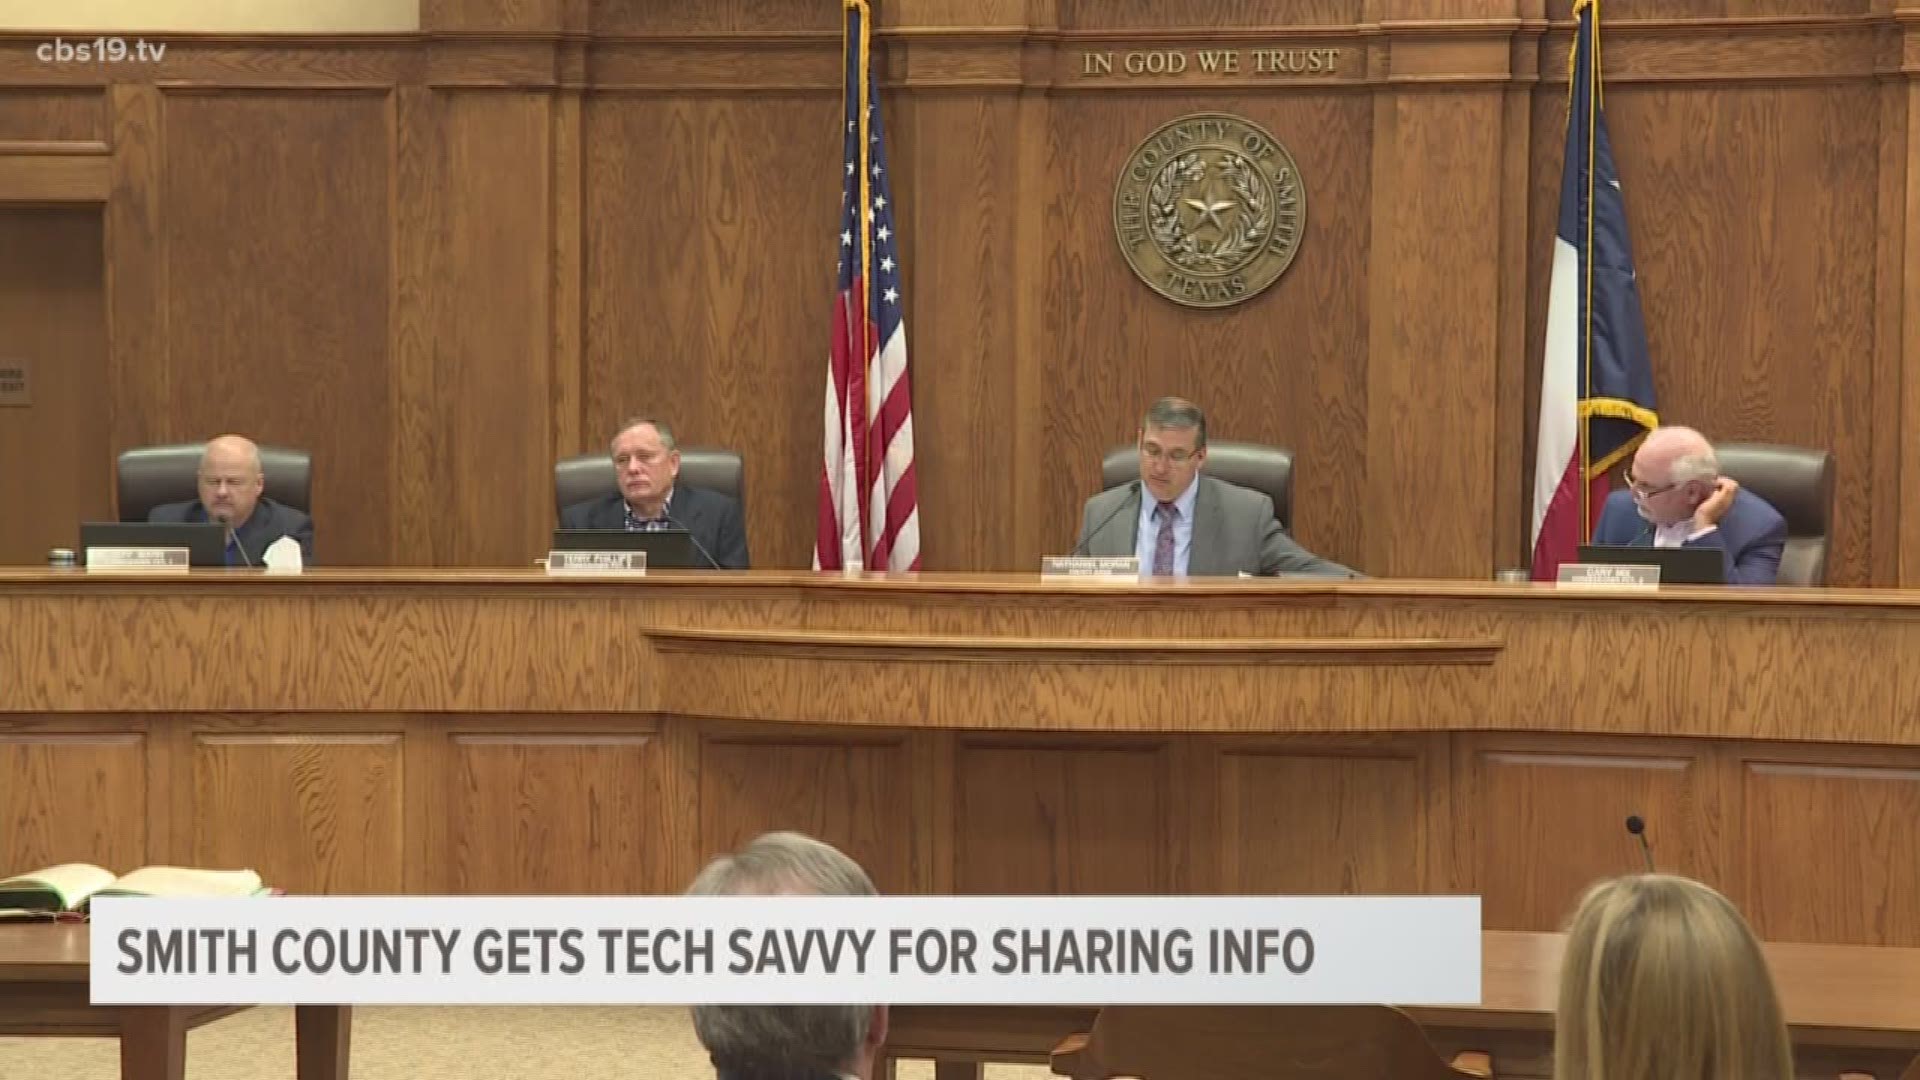 Smith County Commissioners approved entering into a new technology contract for case management software to save the county time and money for the judicial process.